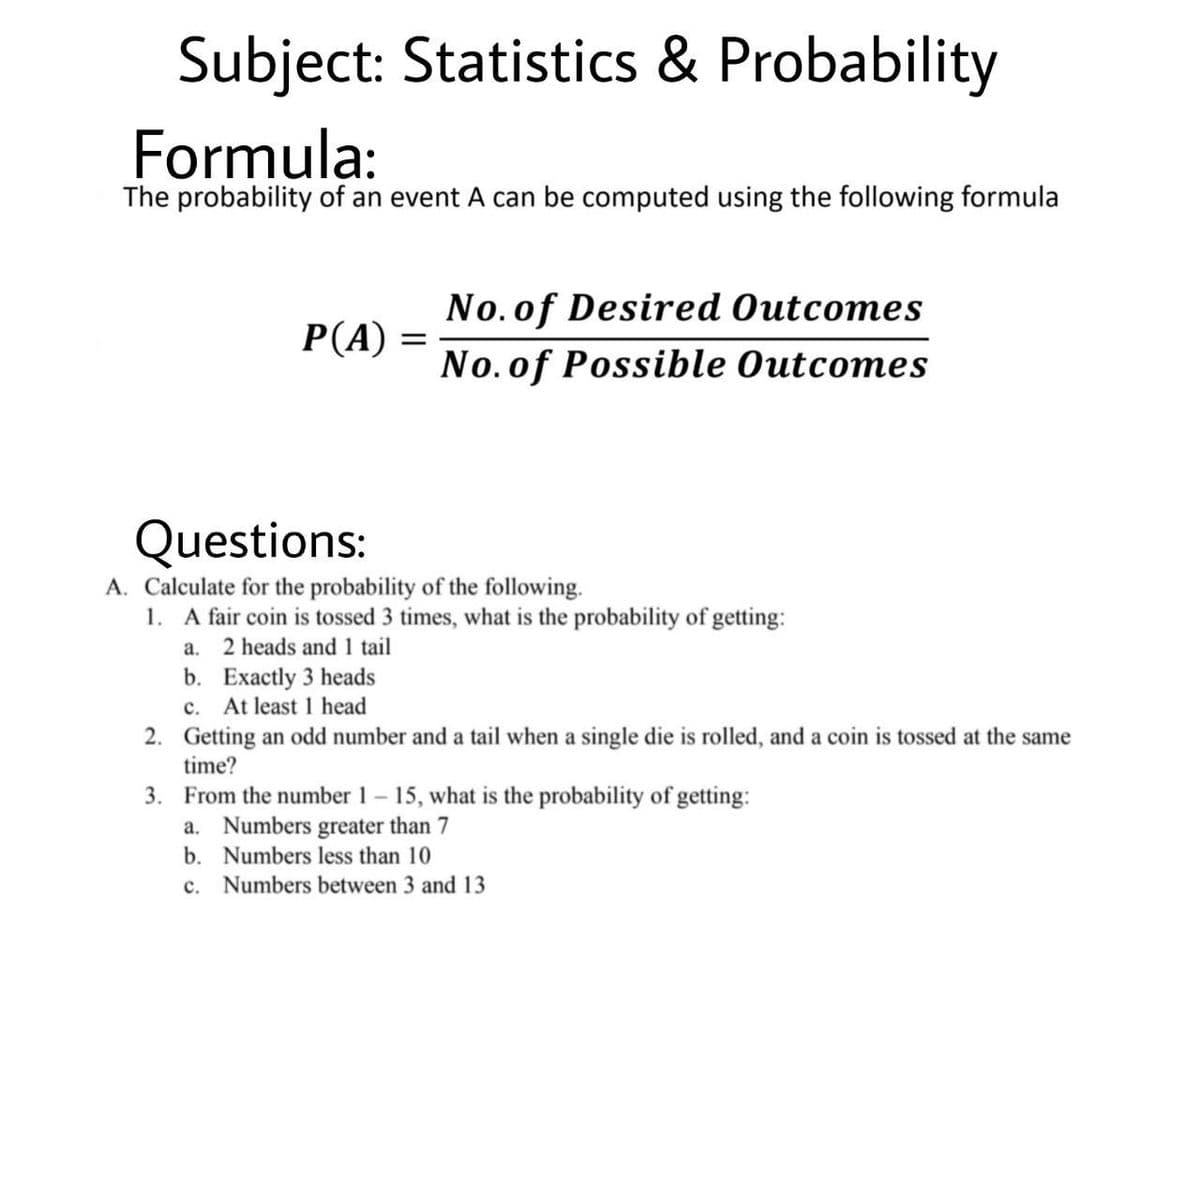 Subject: Statistics & Probability
Formula:
The probability of an event A can be computed using the following formula
No.of Desired Outcomes
P(A)
||
No. of Possible Outcomes
Questions:
A. Calculate for the probability of the following.
1. A fair coin is tossed 3 times, what is the probability of getting:
a. 2 heads and 1 tail
b. Exactly 3 heads
c. At least 1 head
2. Getting an odd number and a tail when a single die is rolled, and a coin is tossed at the same
time?
3. From the number 1 15, what is the probability of getting:
a. Numbers greater than 7
b. Numbers less than 10
c. Numbers between 3 and 13
